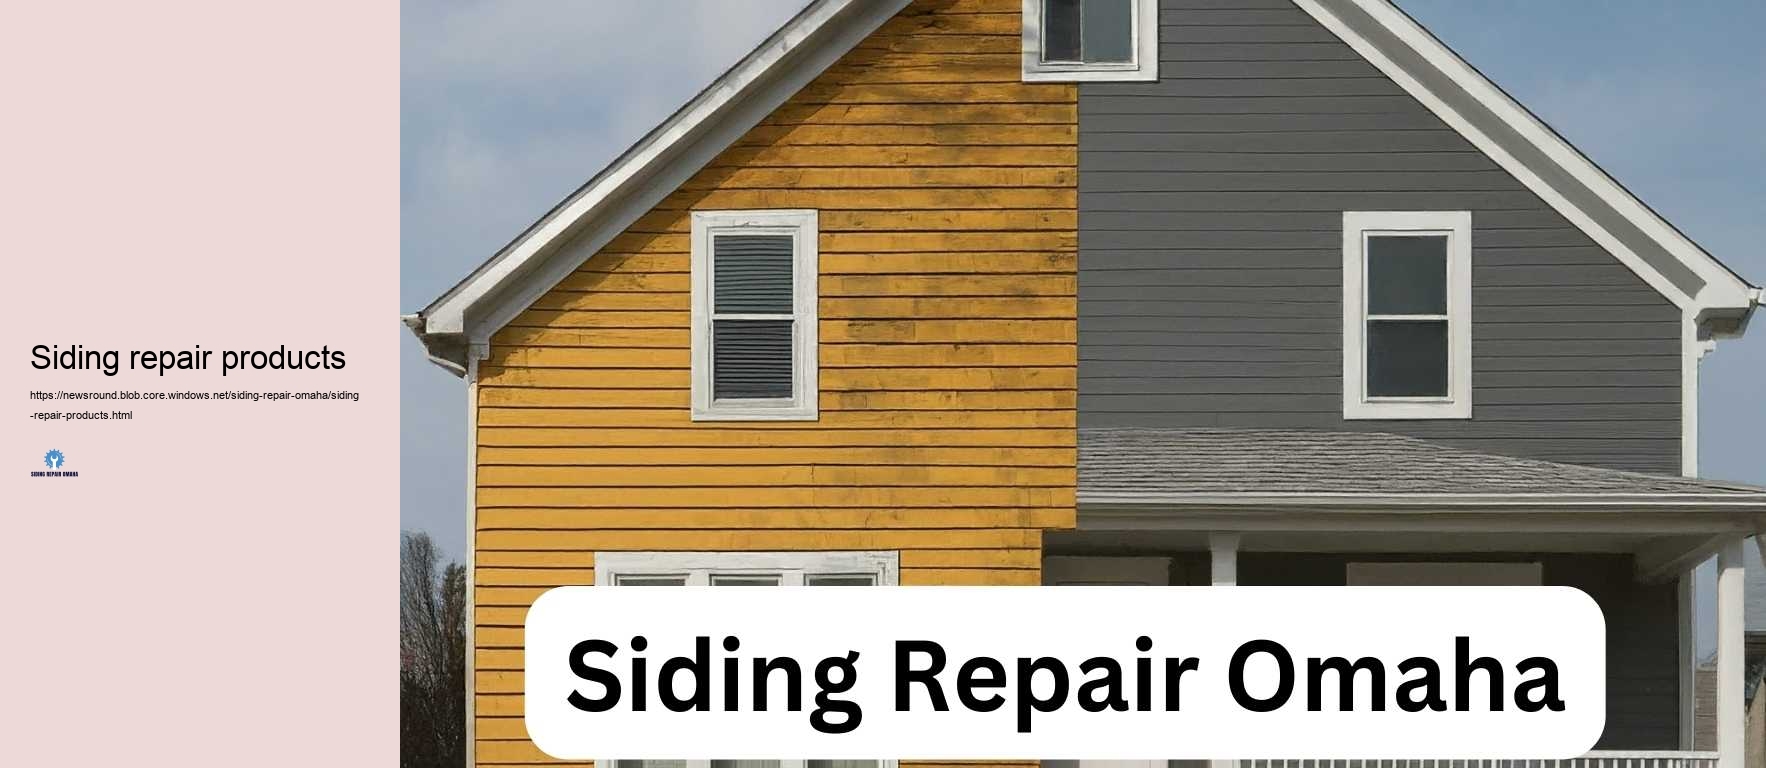 Siding repair products